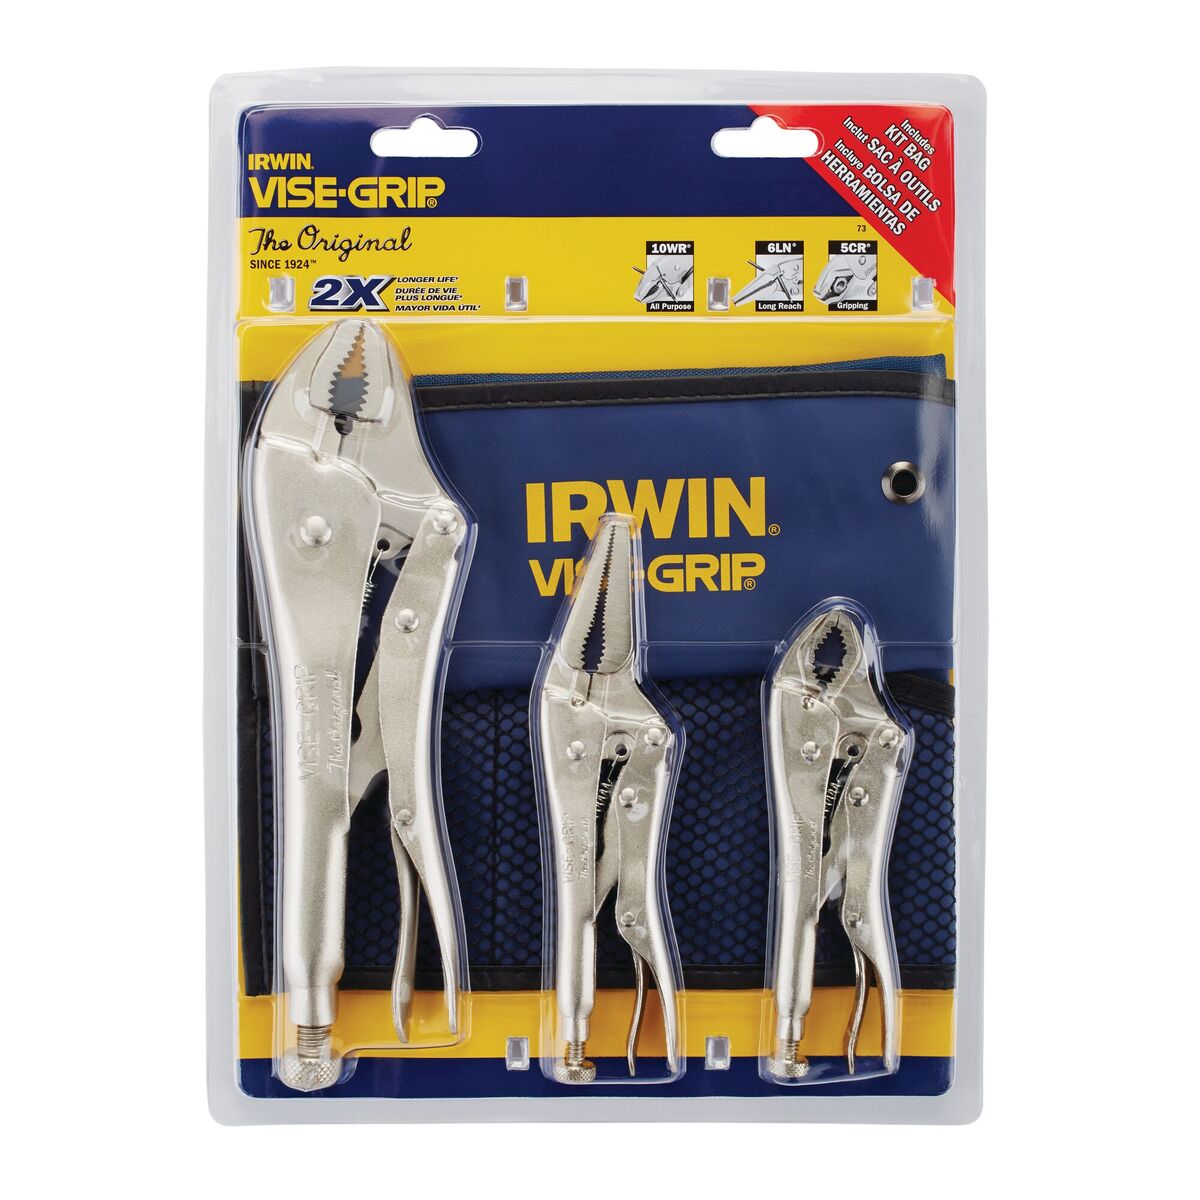 7WR The Original™ Vise-Grip Curved Jaw Locking Pliers with Wire